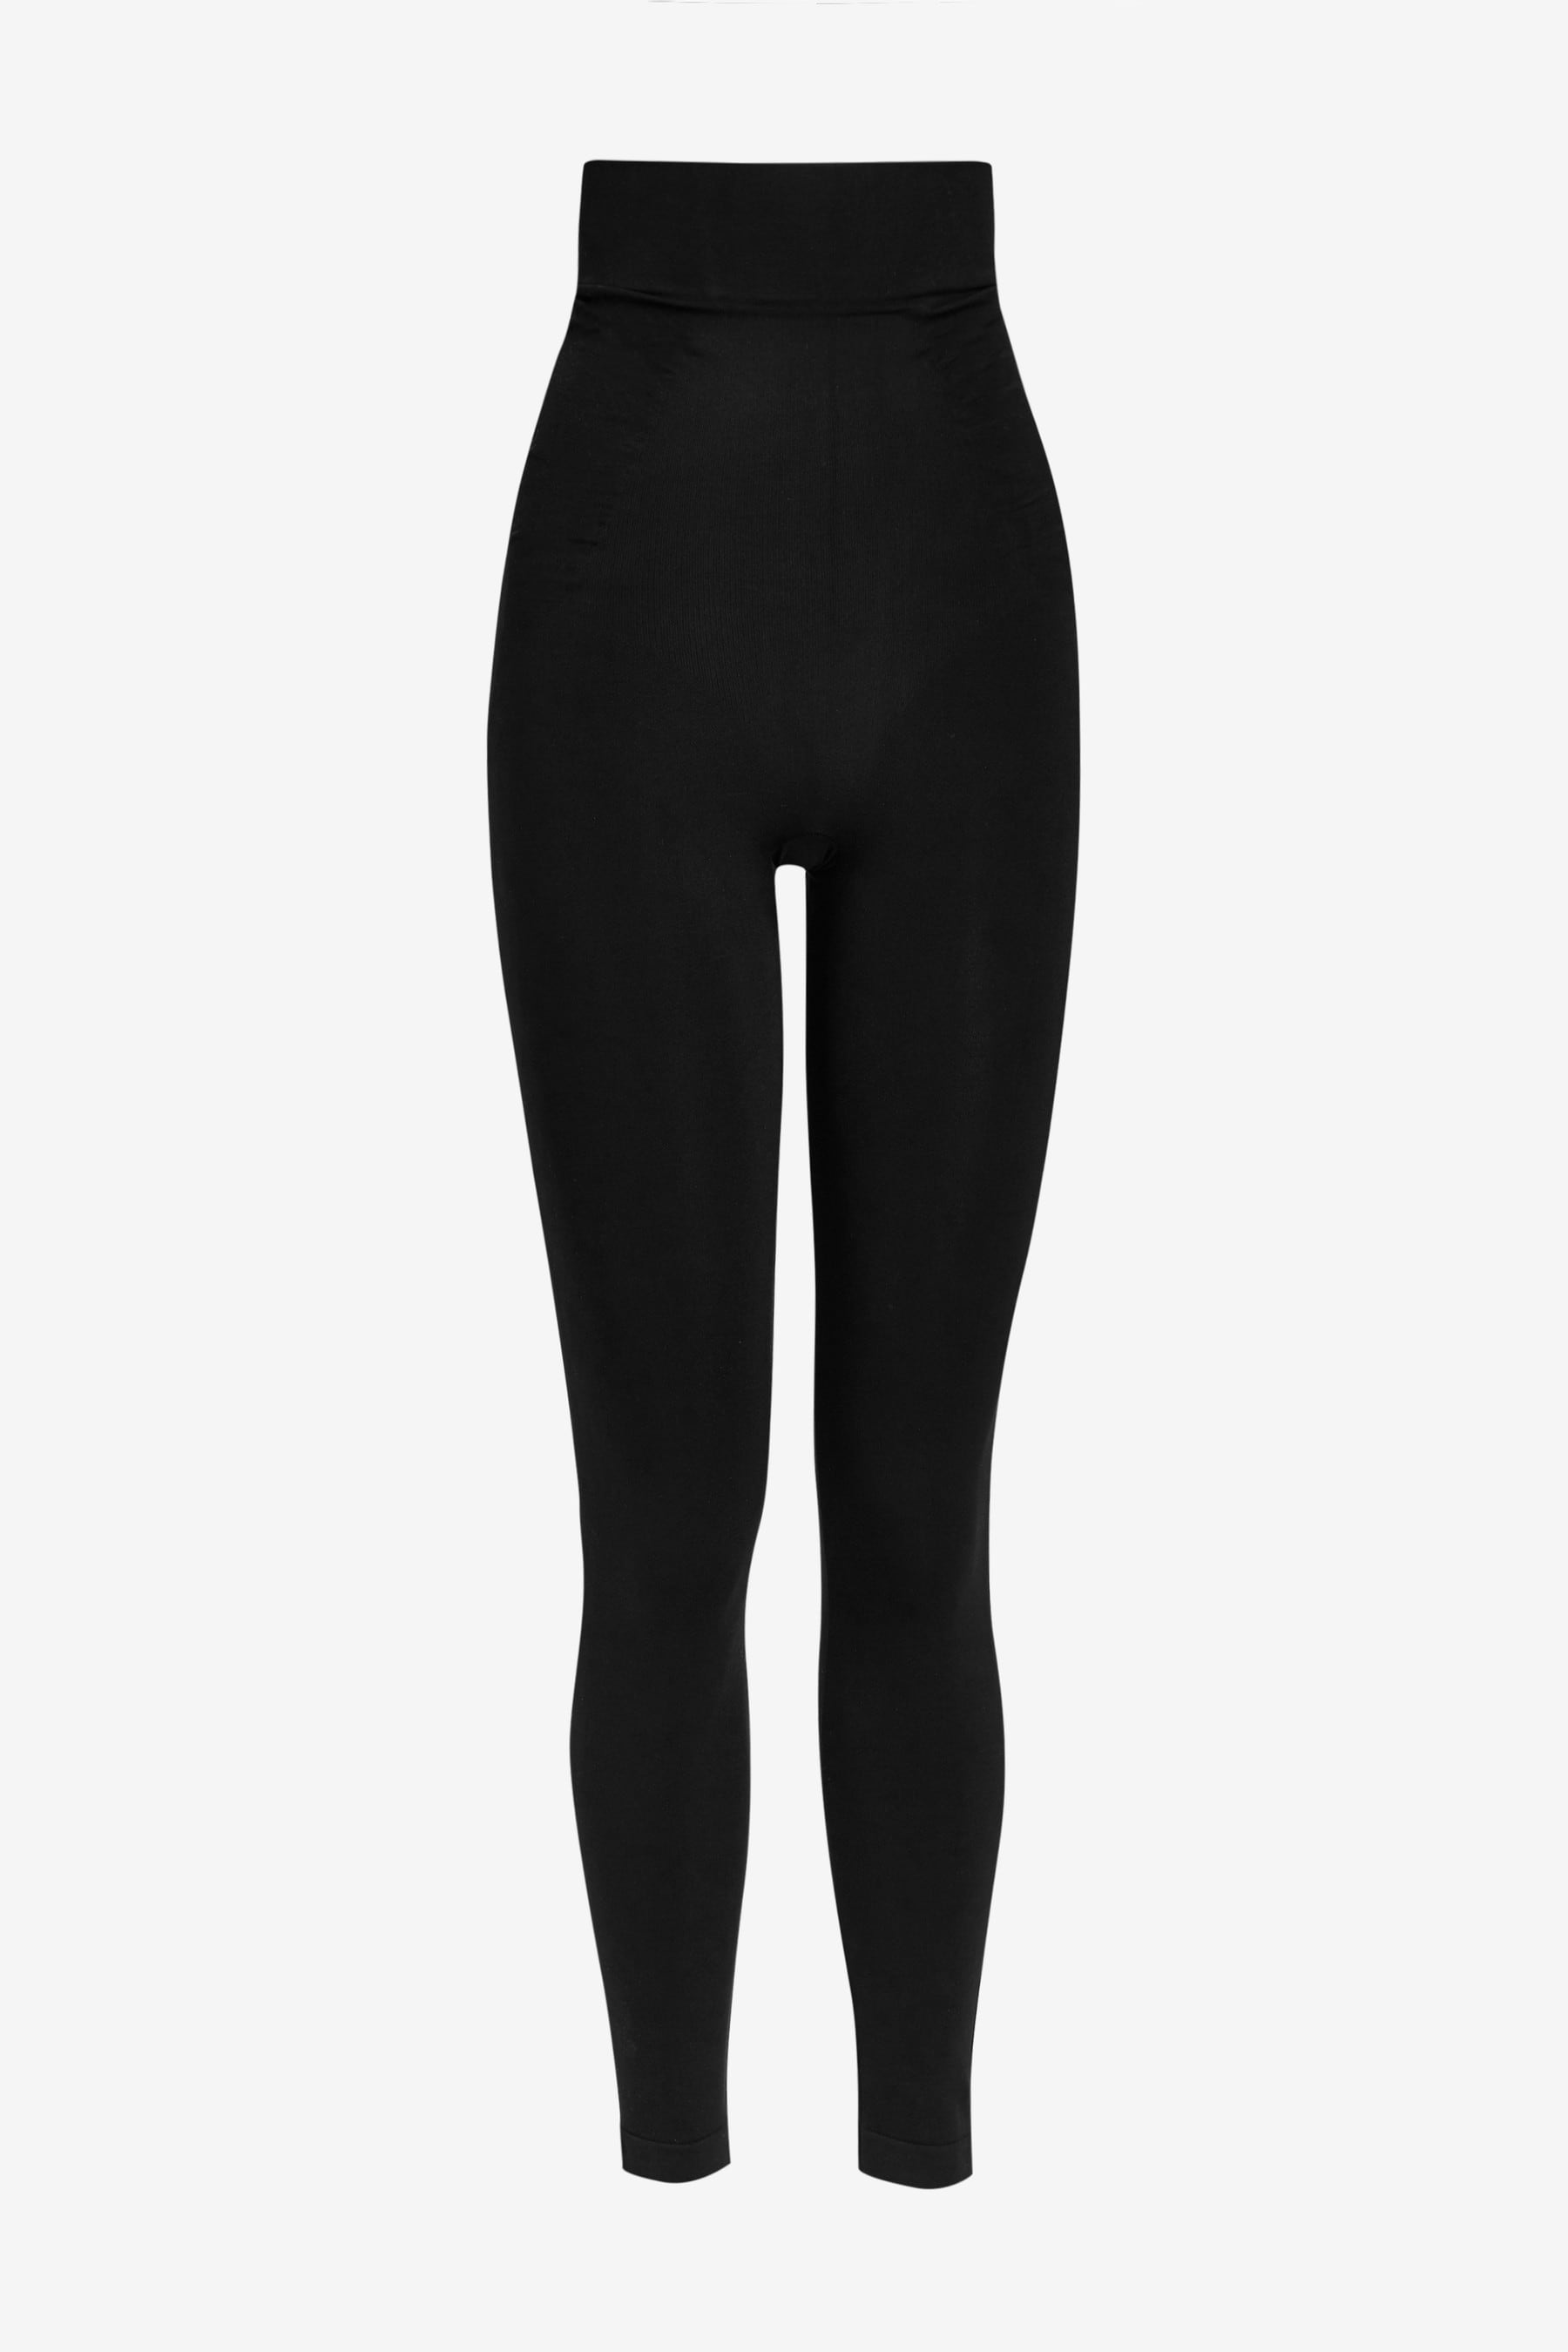 Buy Seamfree Shaping Leggings from the Next UK online shop